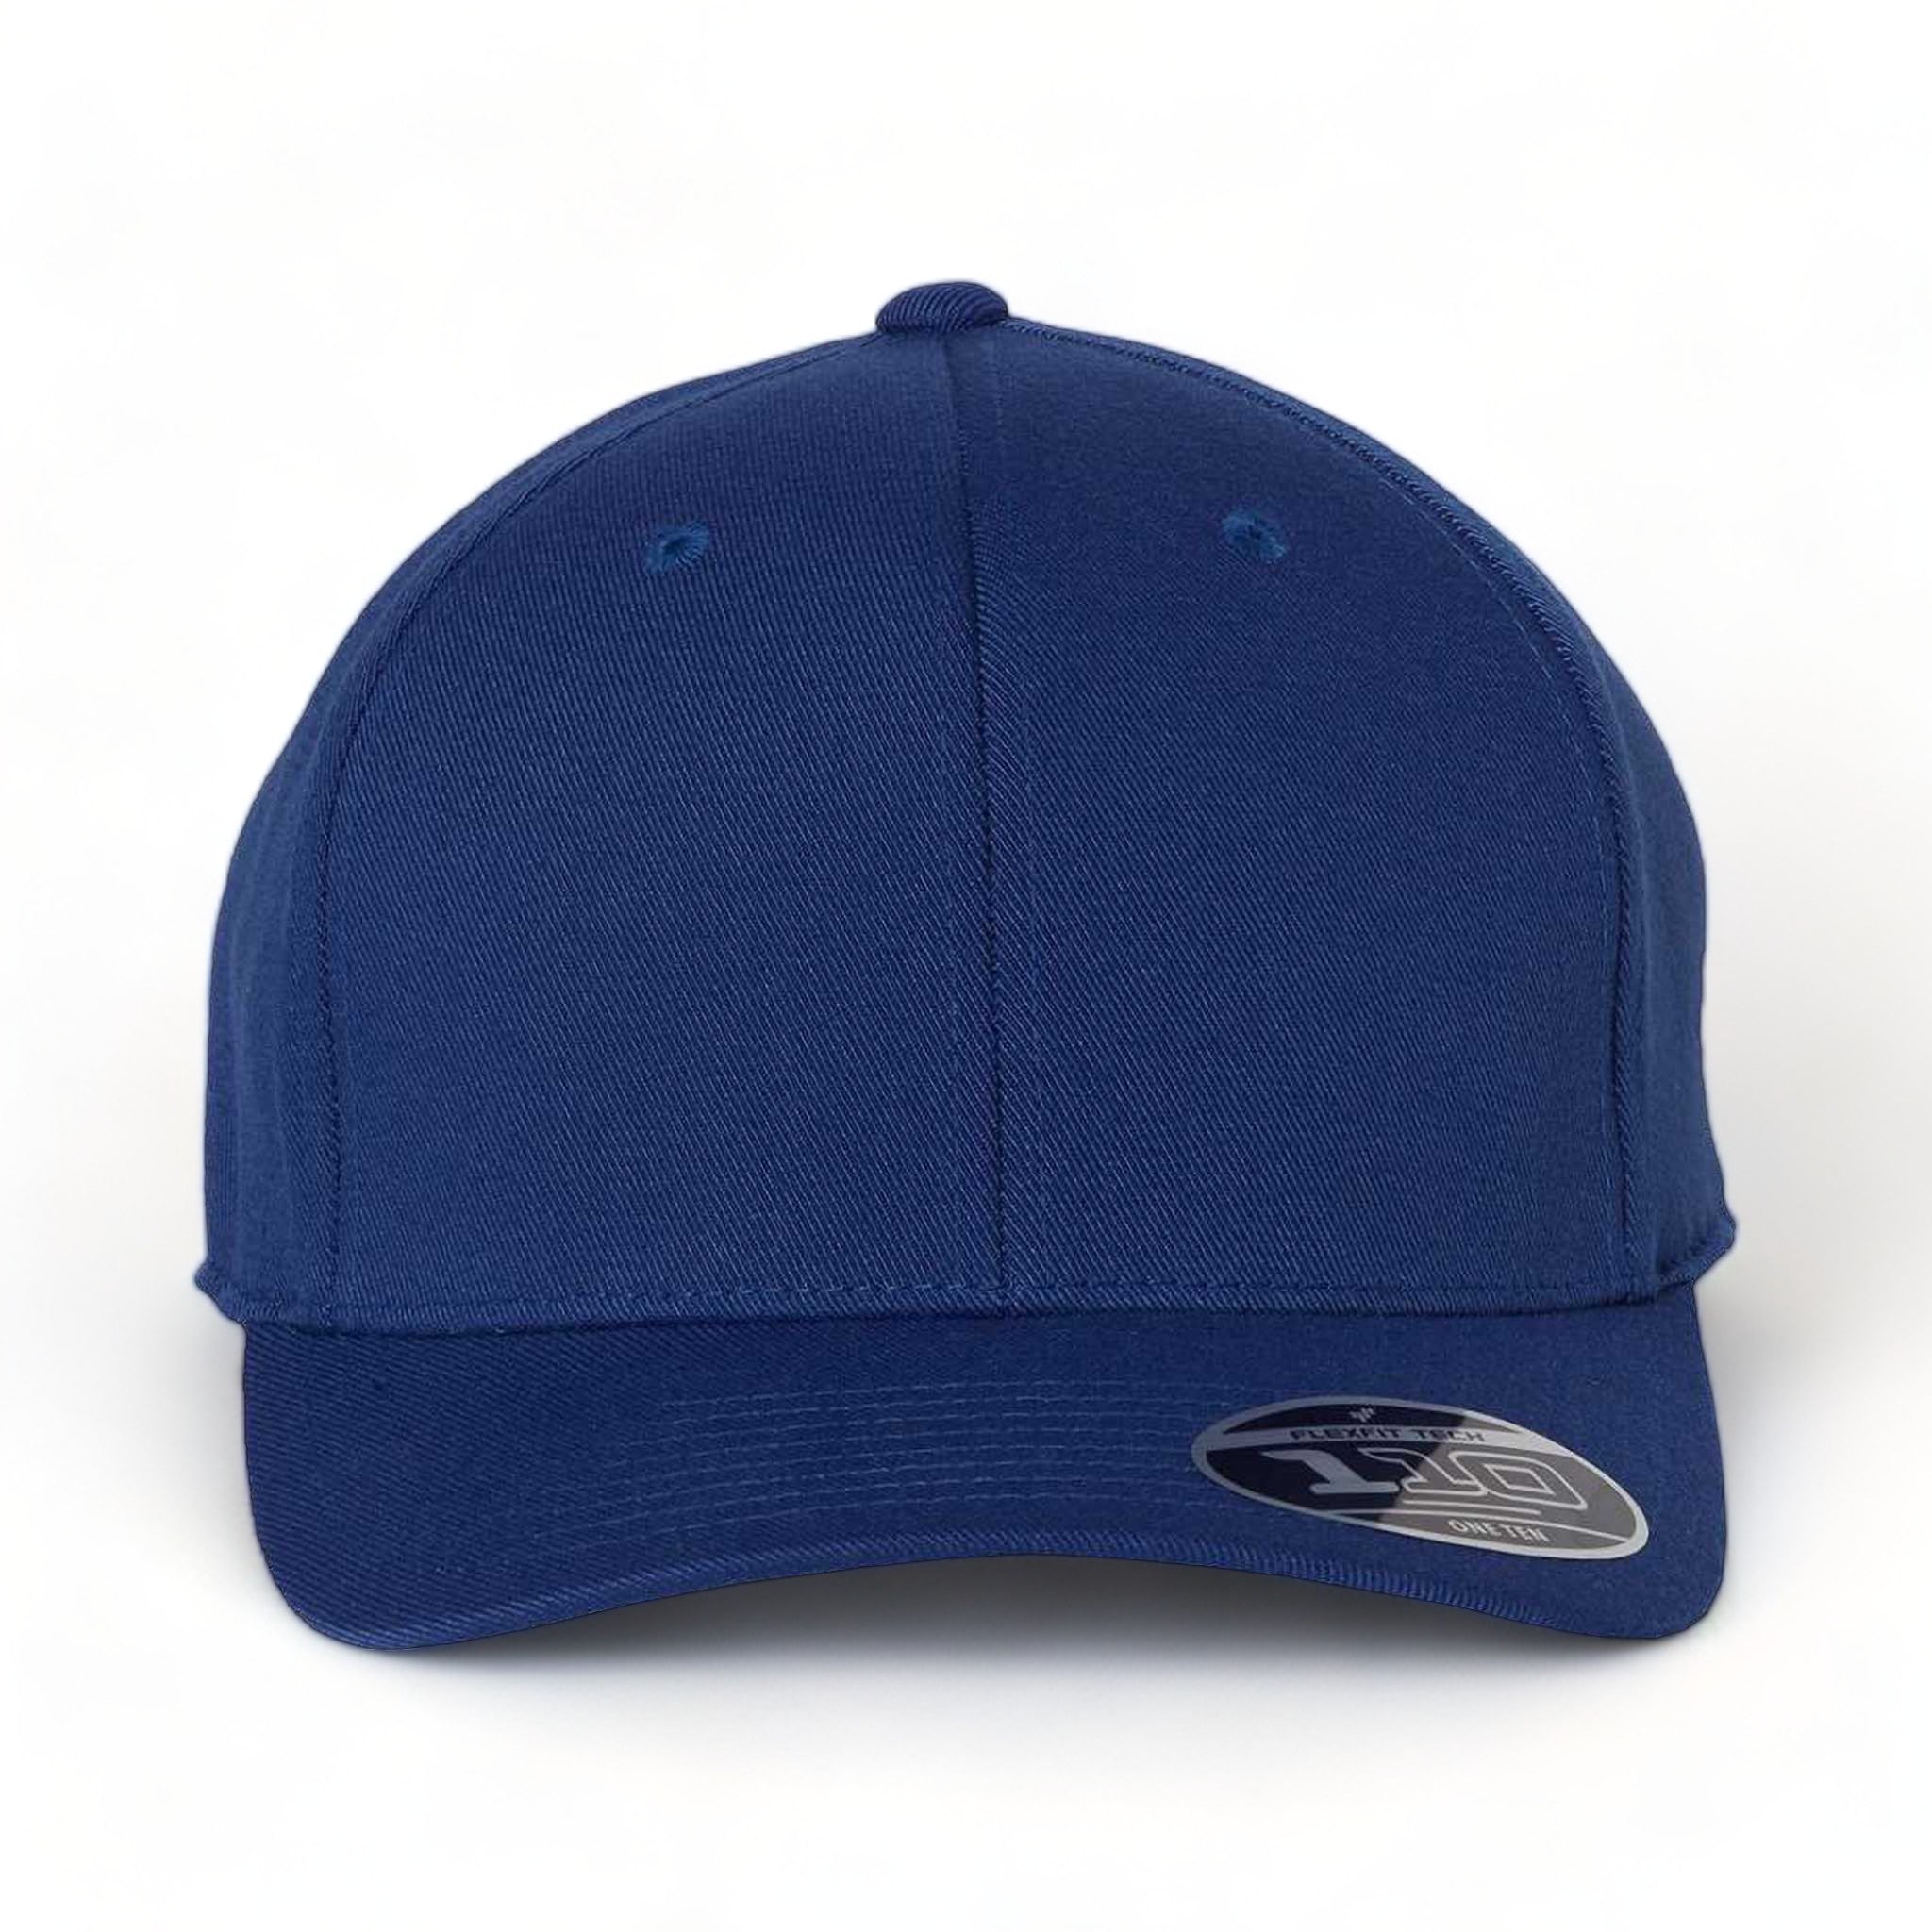 Front view of Flexfit 110C custom hat in royal blue